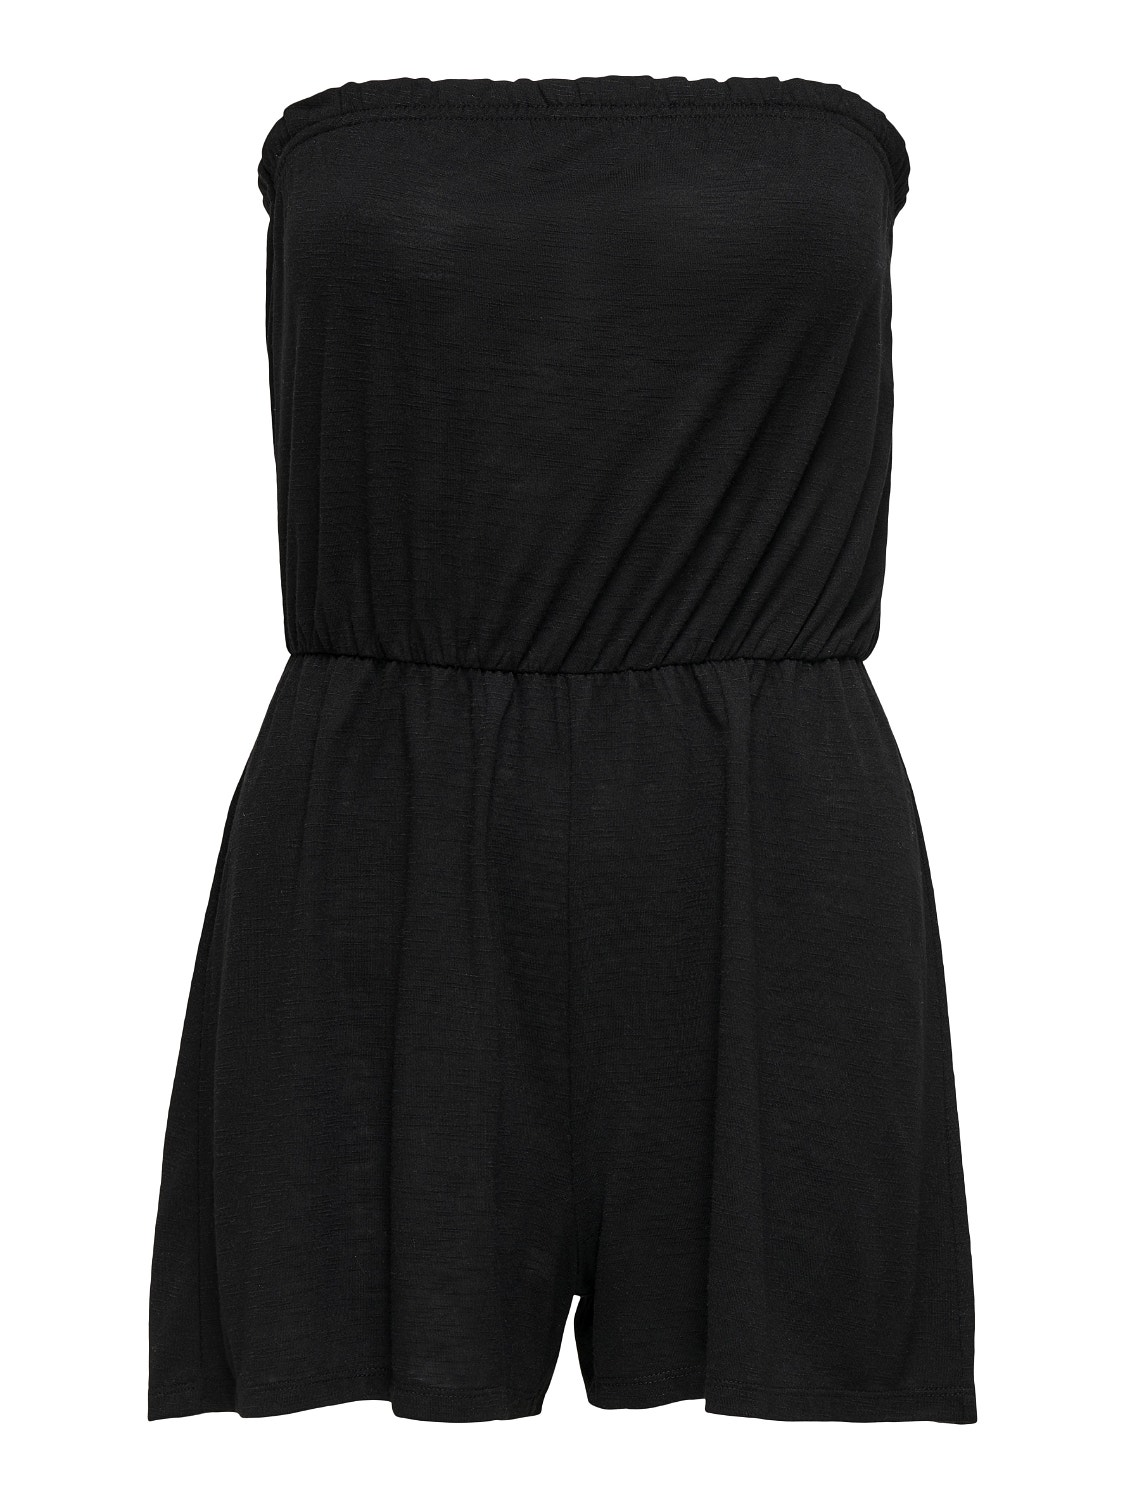 ONLY Schlauch Playsuit -Black - 15243782